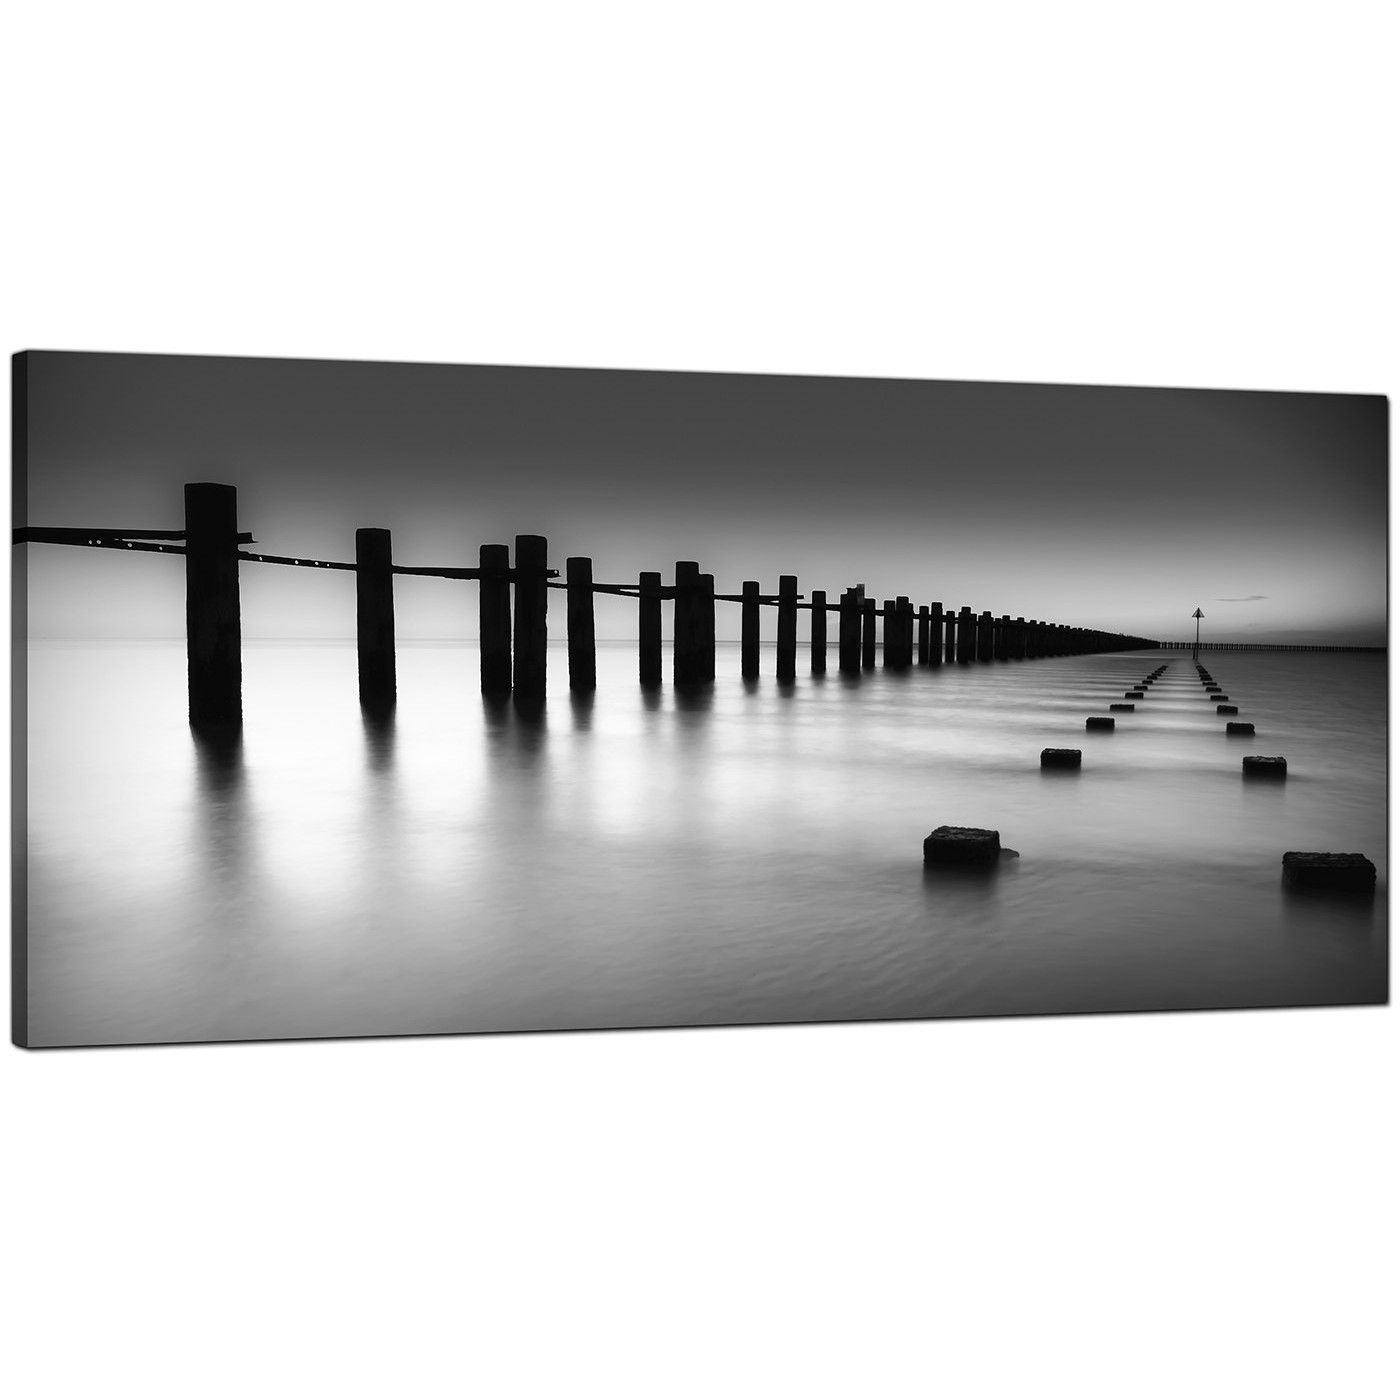 Modern Black And White Canvas Art Of The Sea Intended For Black And White Large Canvas Wall Art (View 2 of 20)